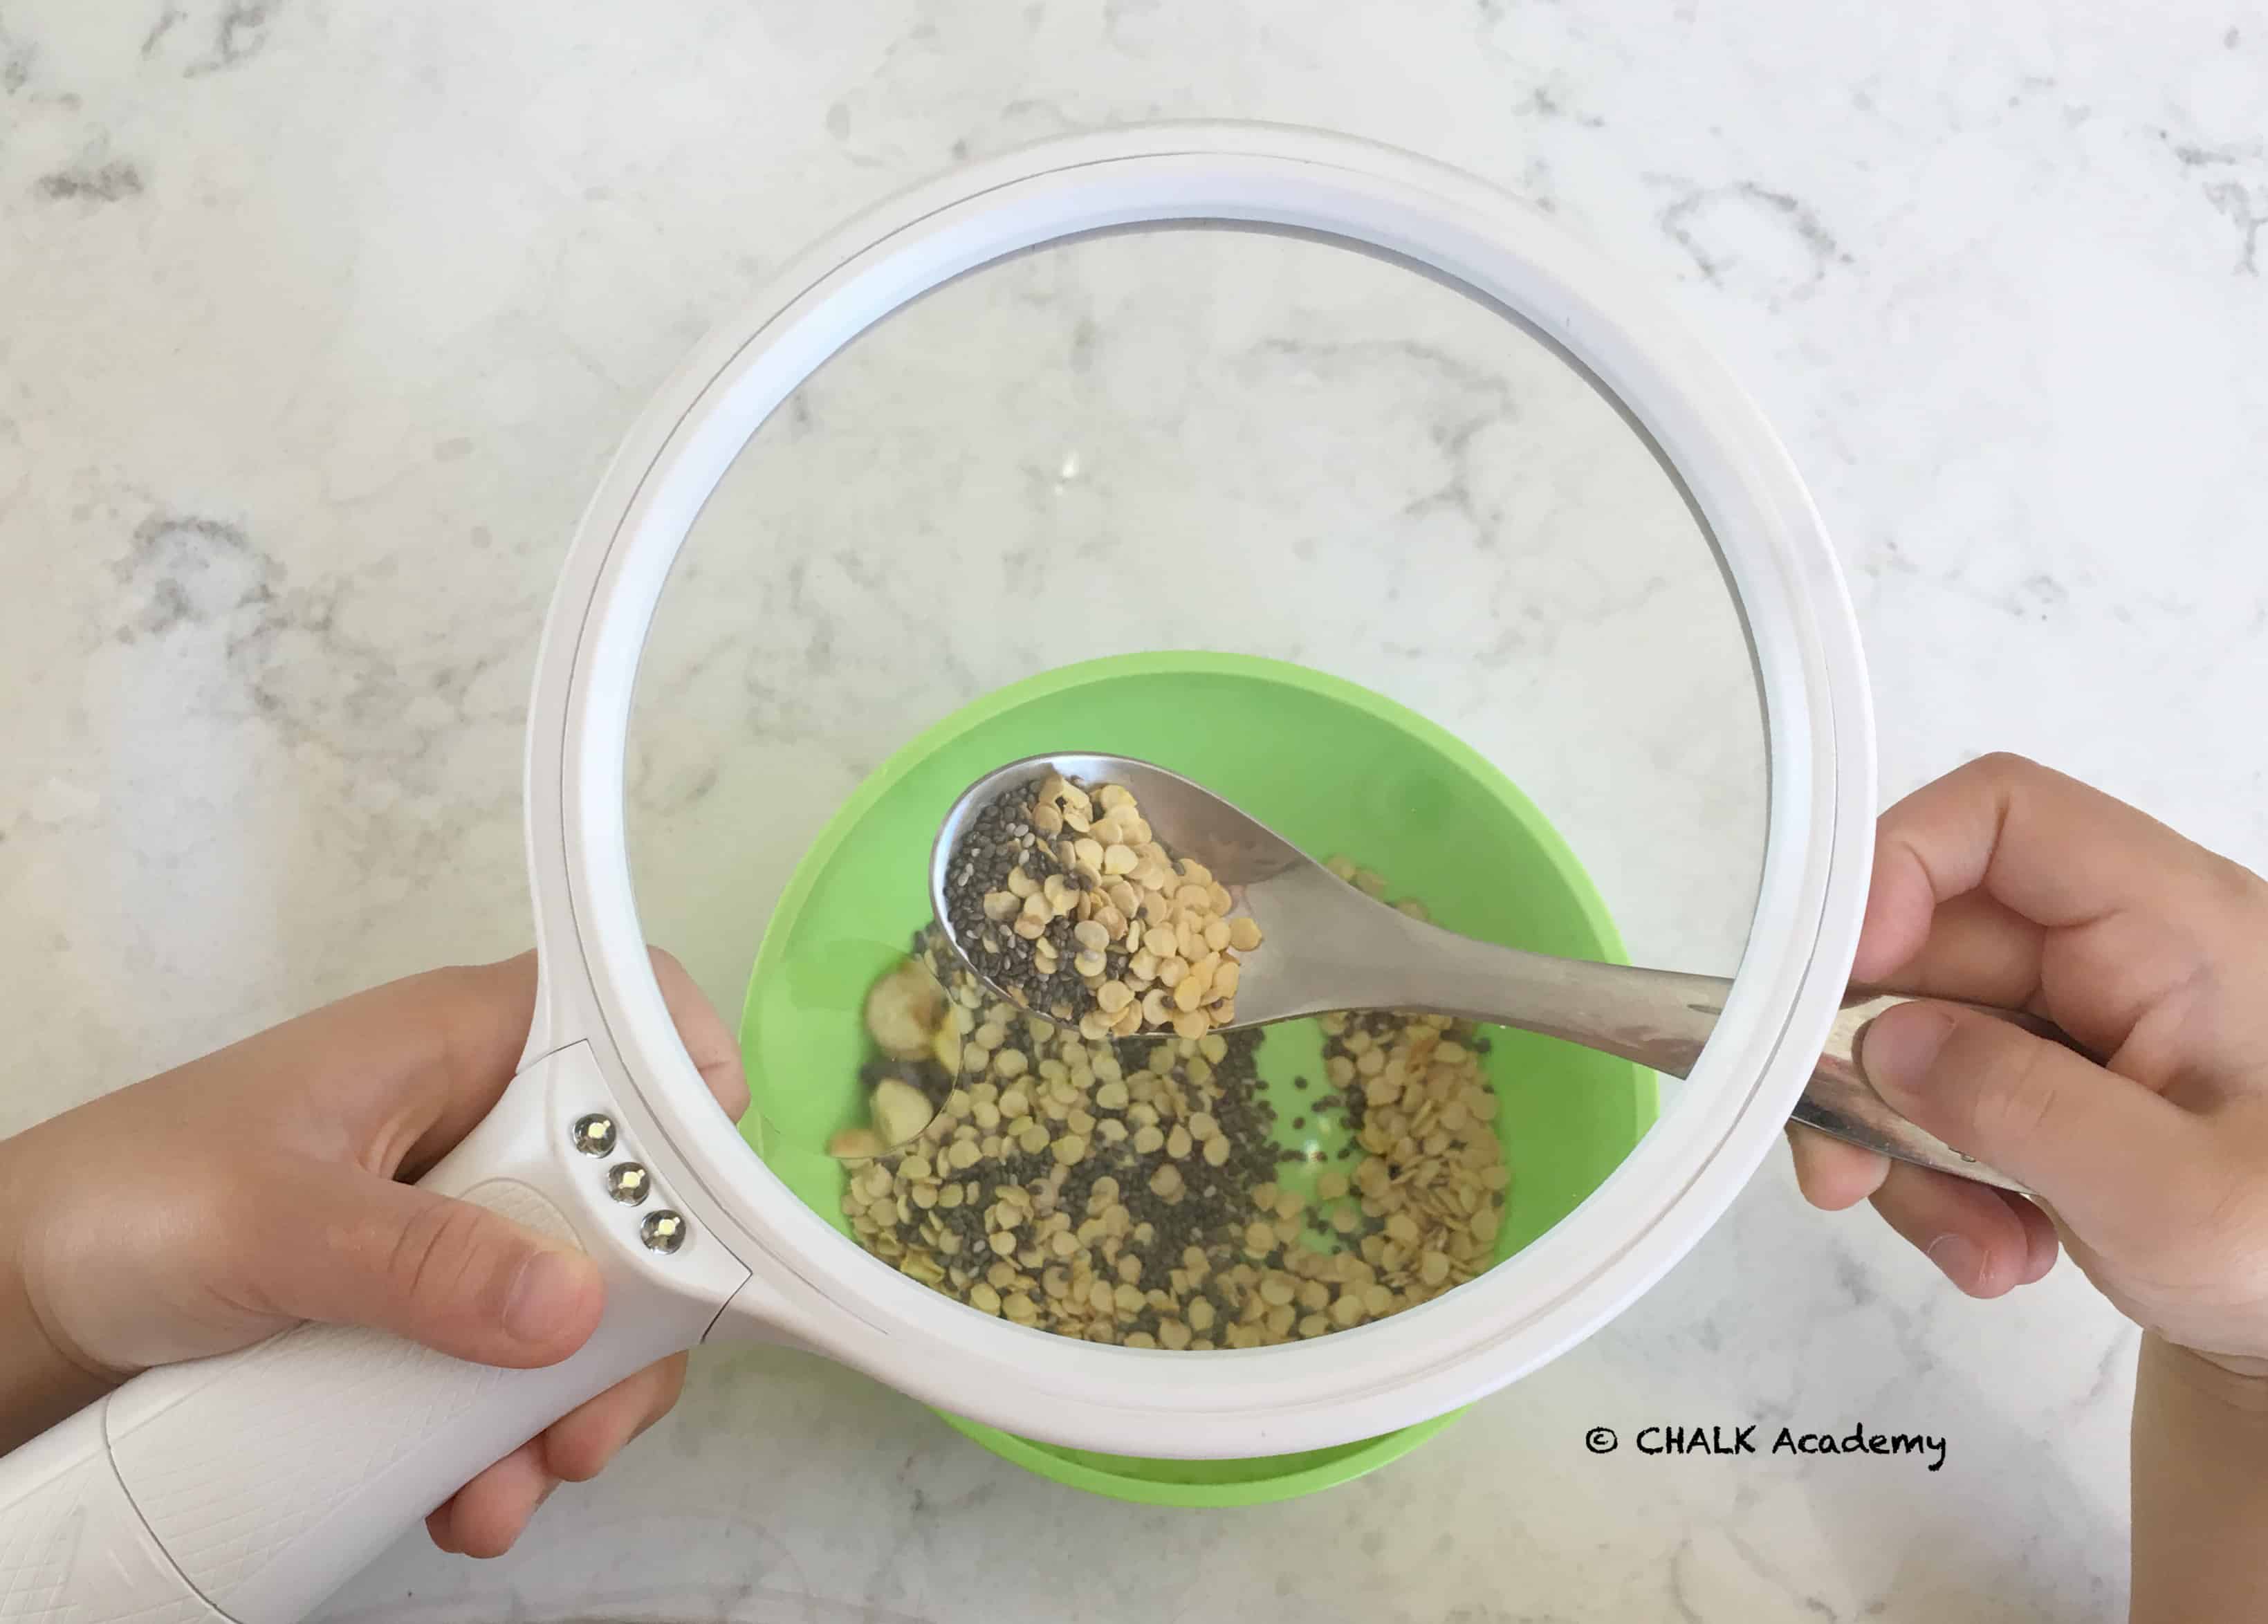 Pepper seeds mixed with chia seeds under magnifying glass